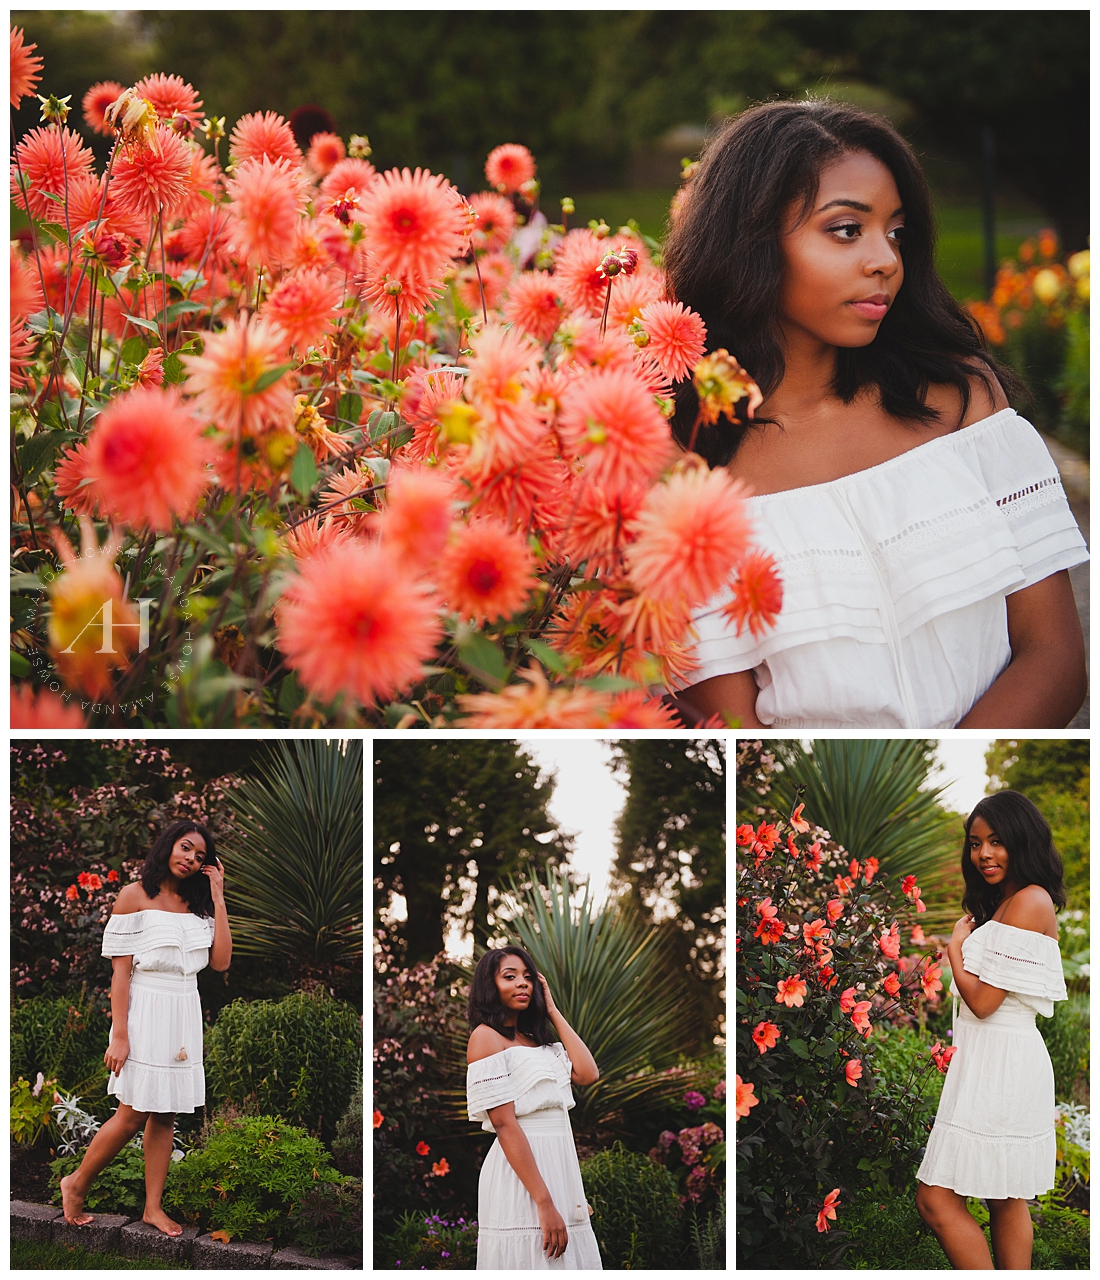 Point Defiance Rose Garden Senior Portraits | Senior Girl Posing in Front of Dahlias | Late Summer Portrait Inspiration | Photographed by Tacoma Senior Photographer Amanda Howse Photography